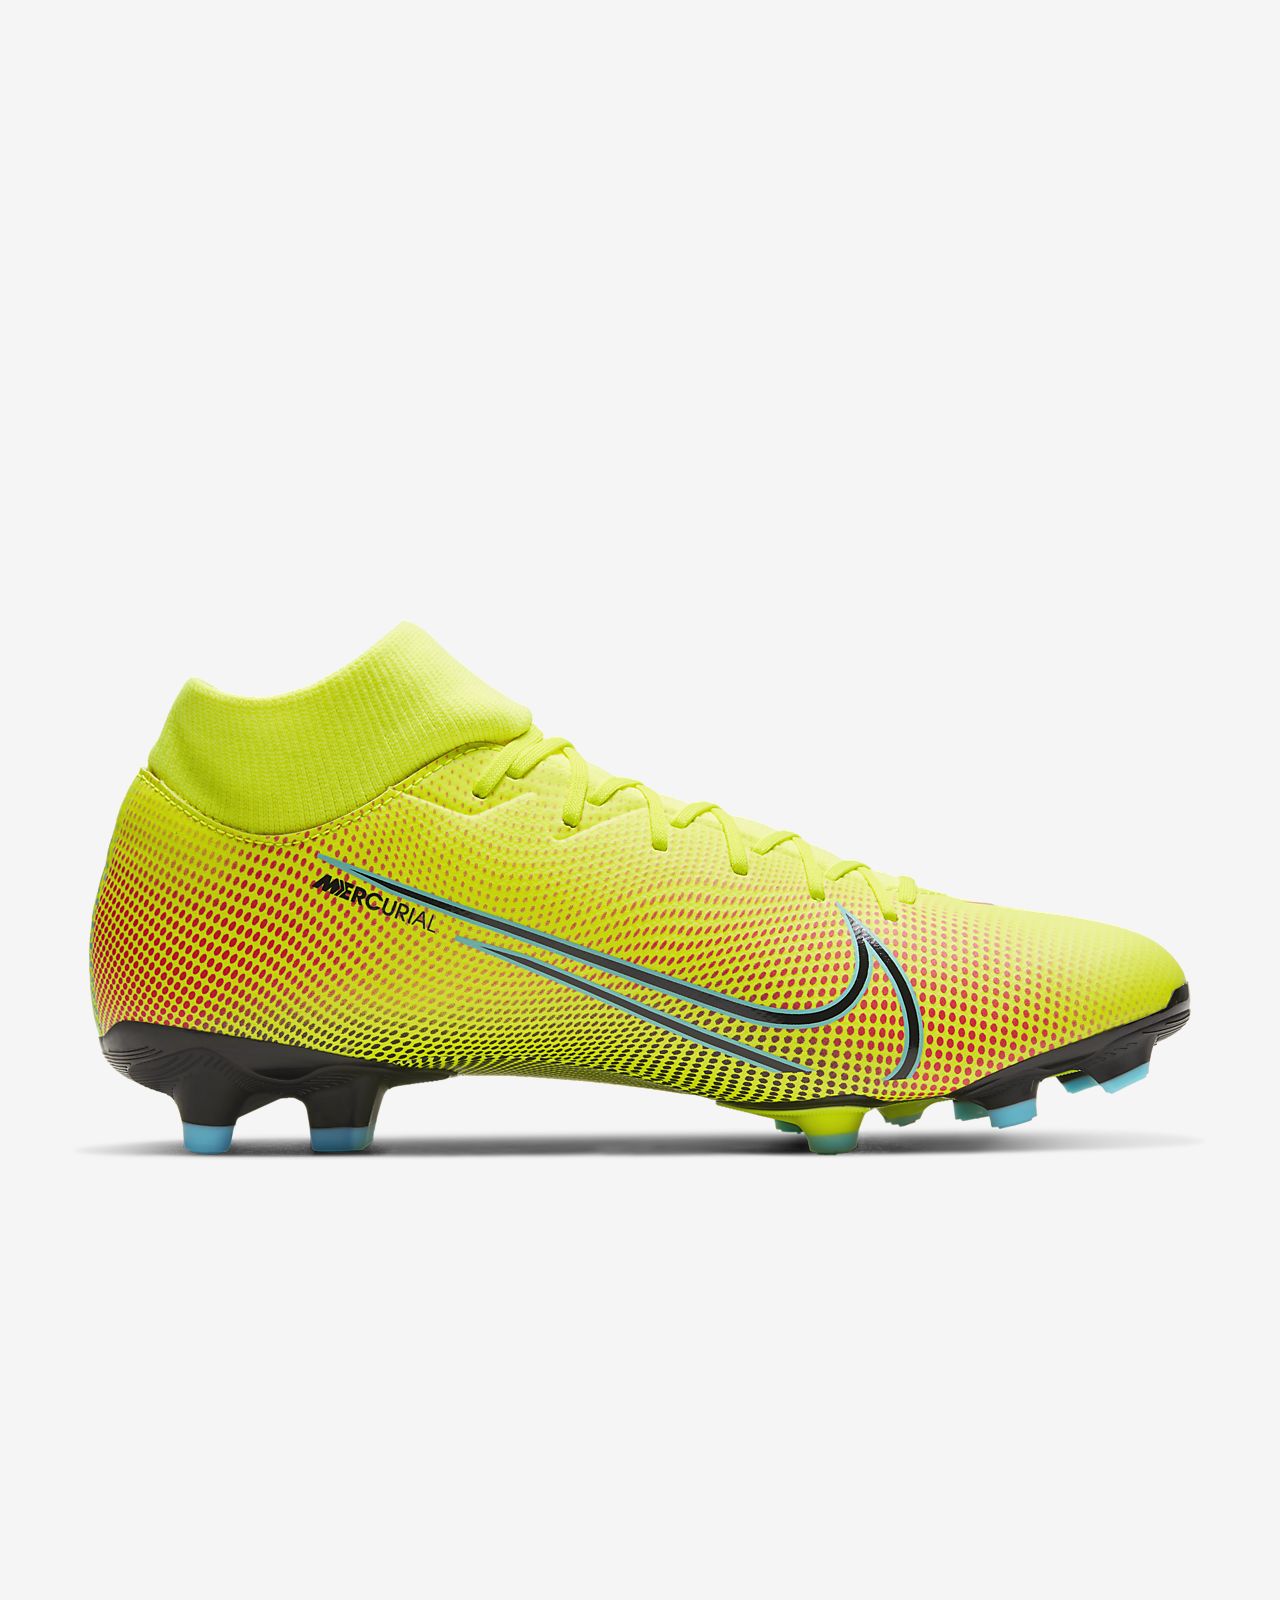 Nike Mercurial Superfly VII Academy SG PRO AC Blue. Today pc